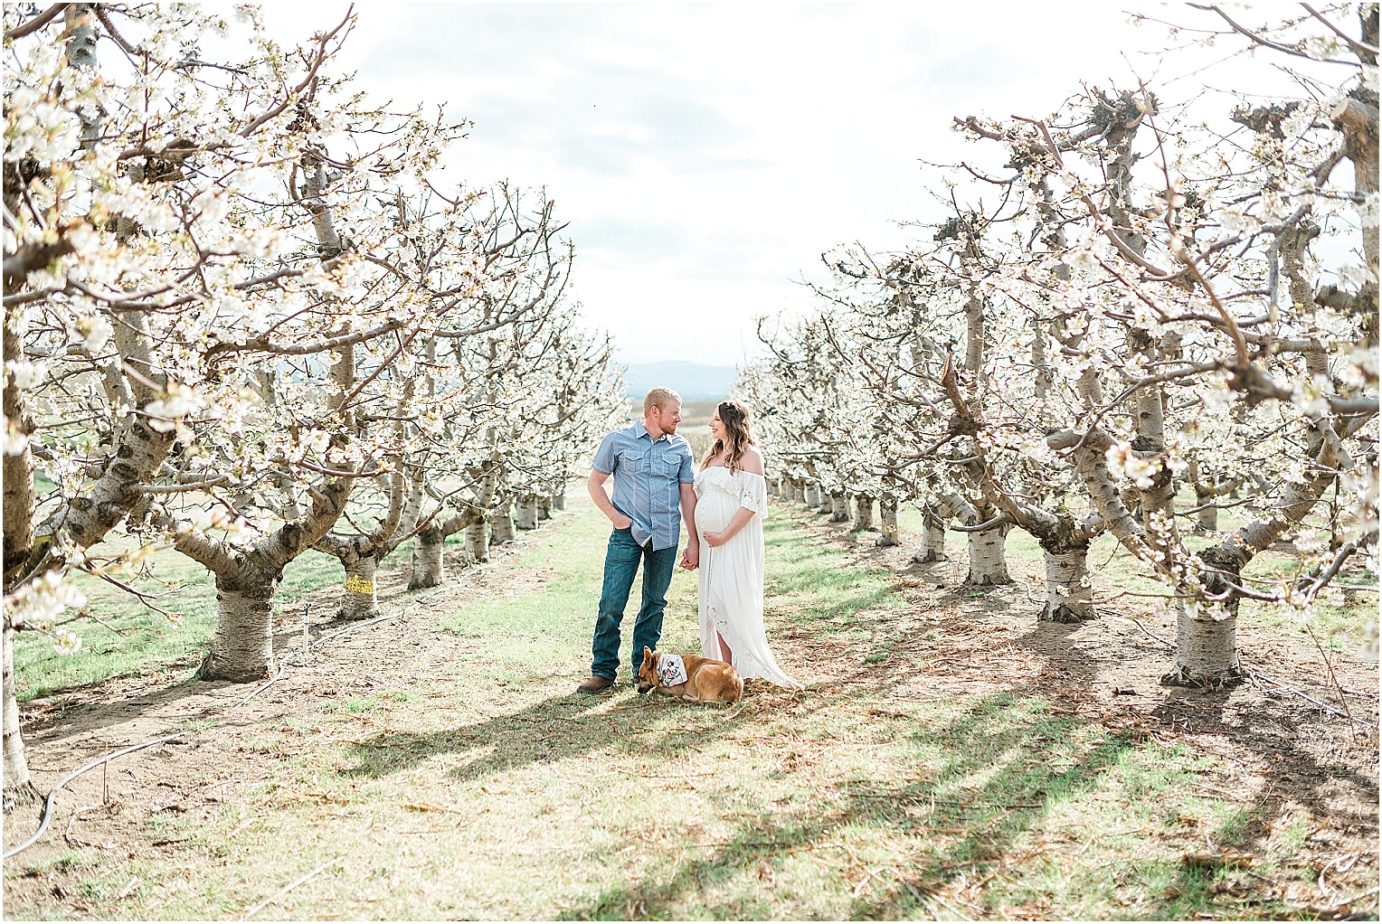 County Maternity Session couple posing in cherry blossoms orchard